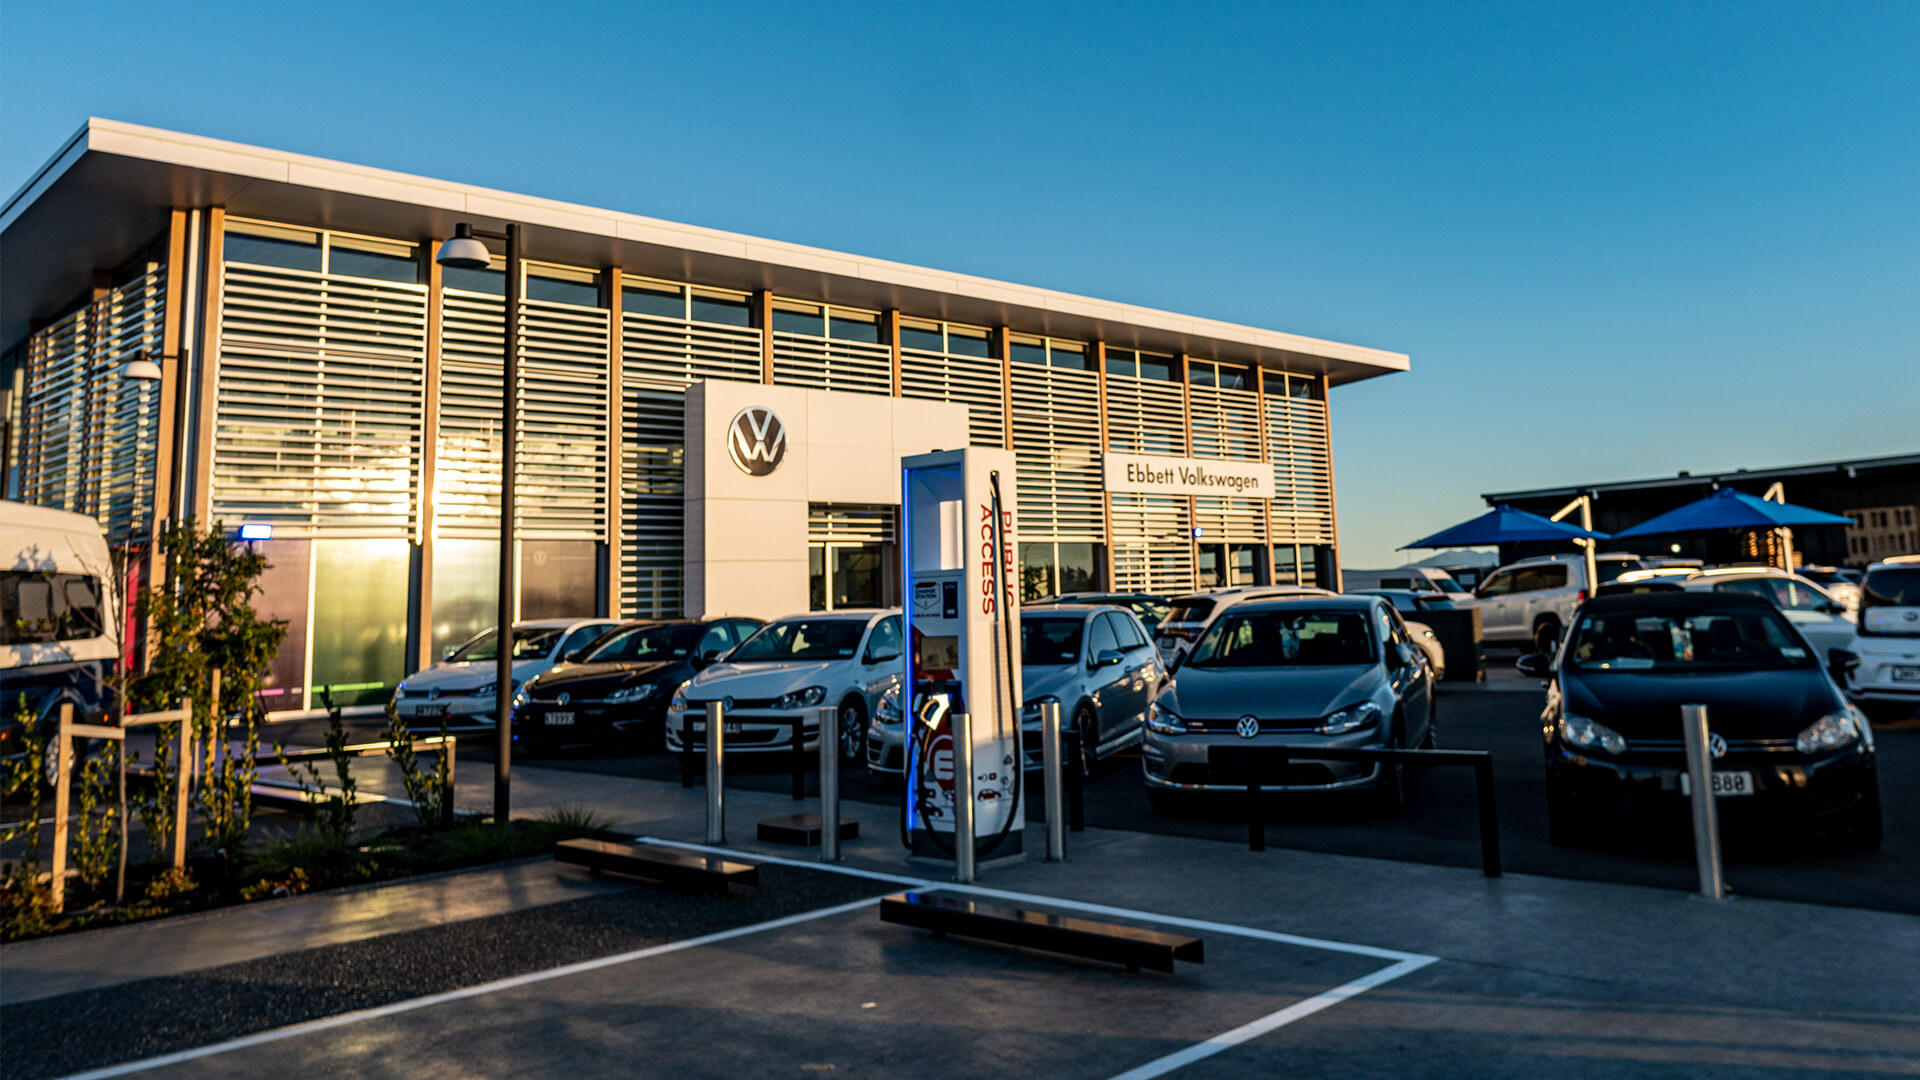 Did you know that we have one of the fastest EV chargers in New Zealand on our front doorstep? It’s open 24/7 to the public and is straightforward to use through the ChargeNet network.